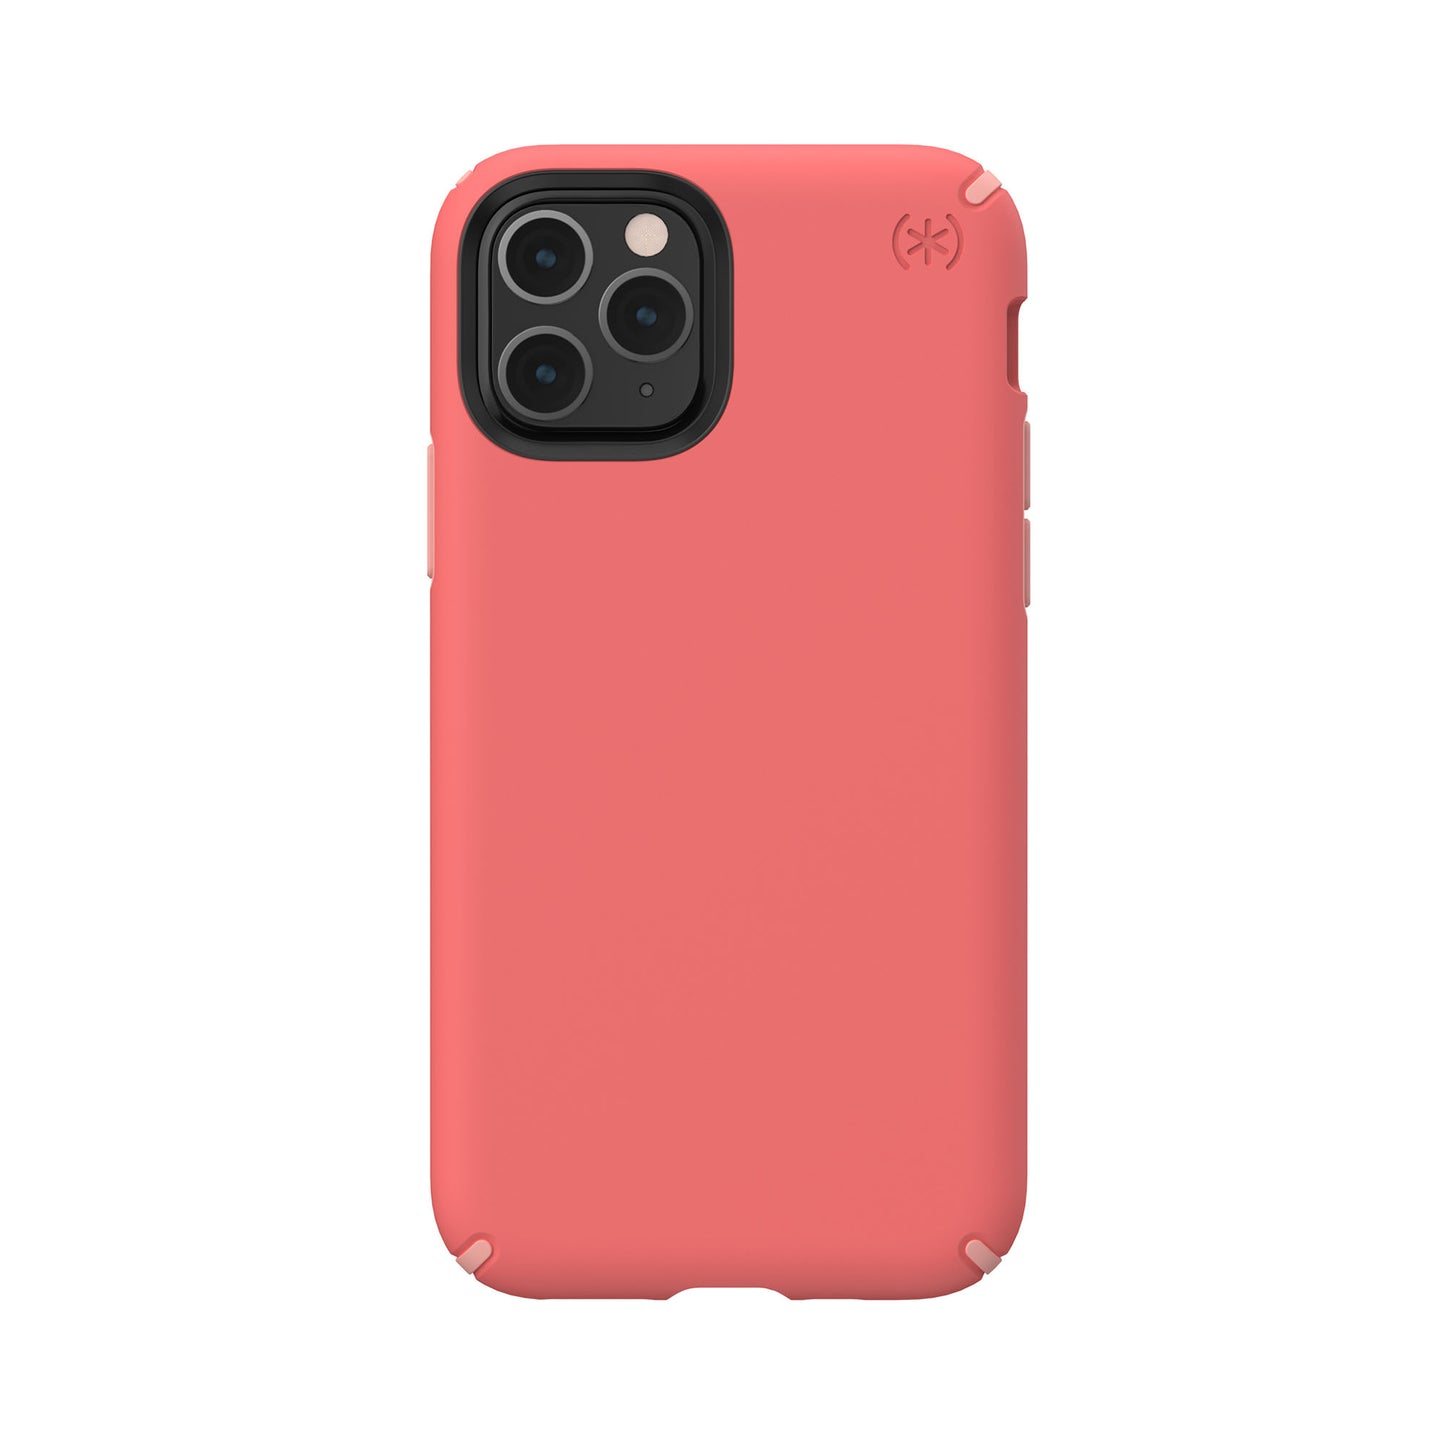 SPECK Presidio Pro Case for iPhone 11 Pro Max - Parrot Pink/Chiffon Pink